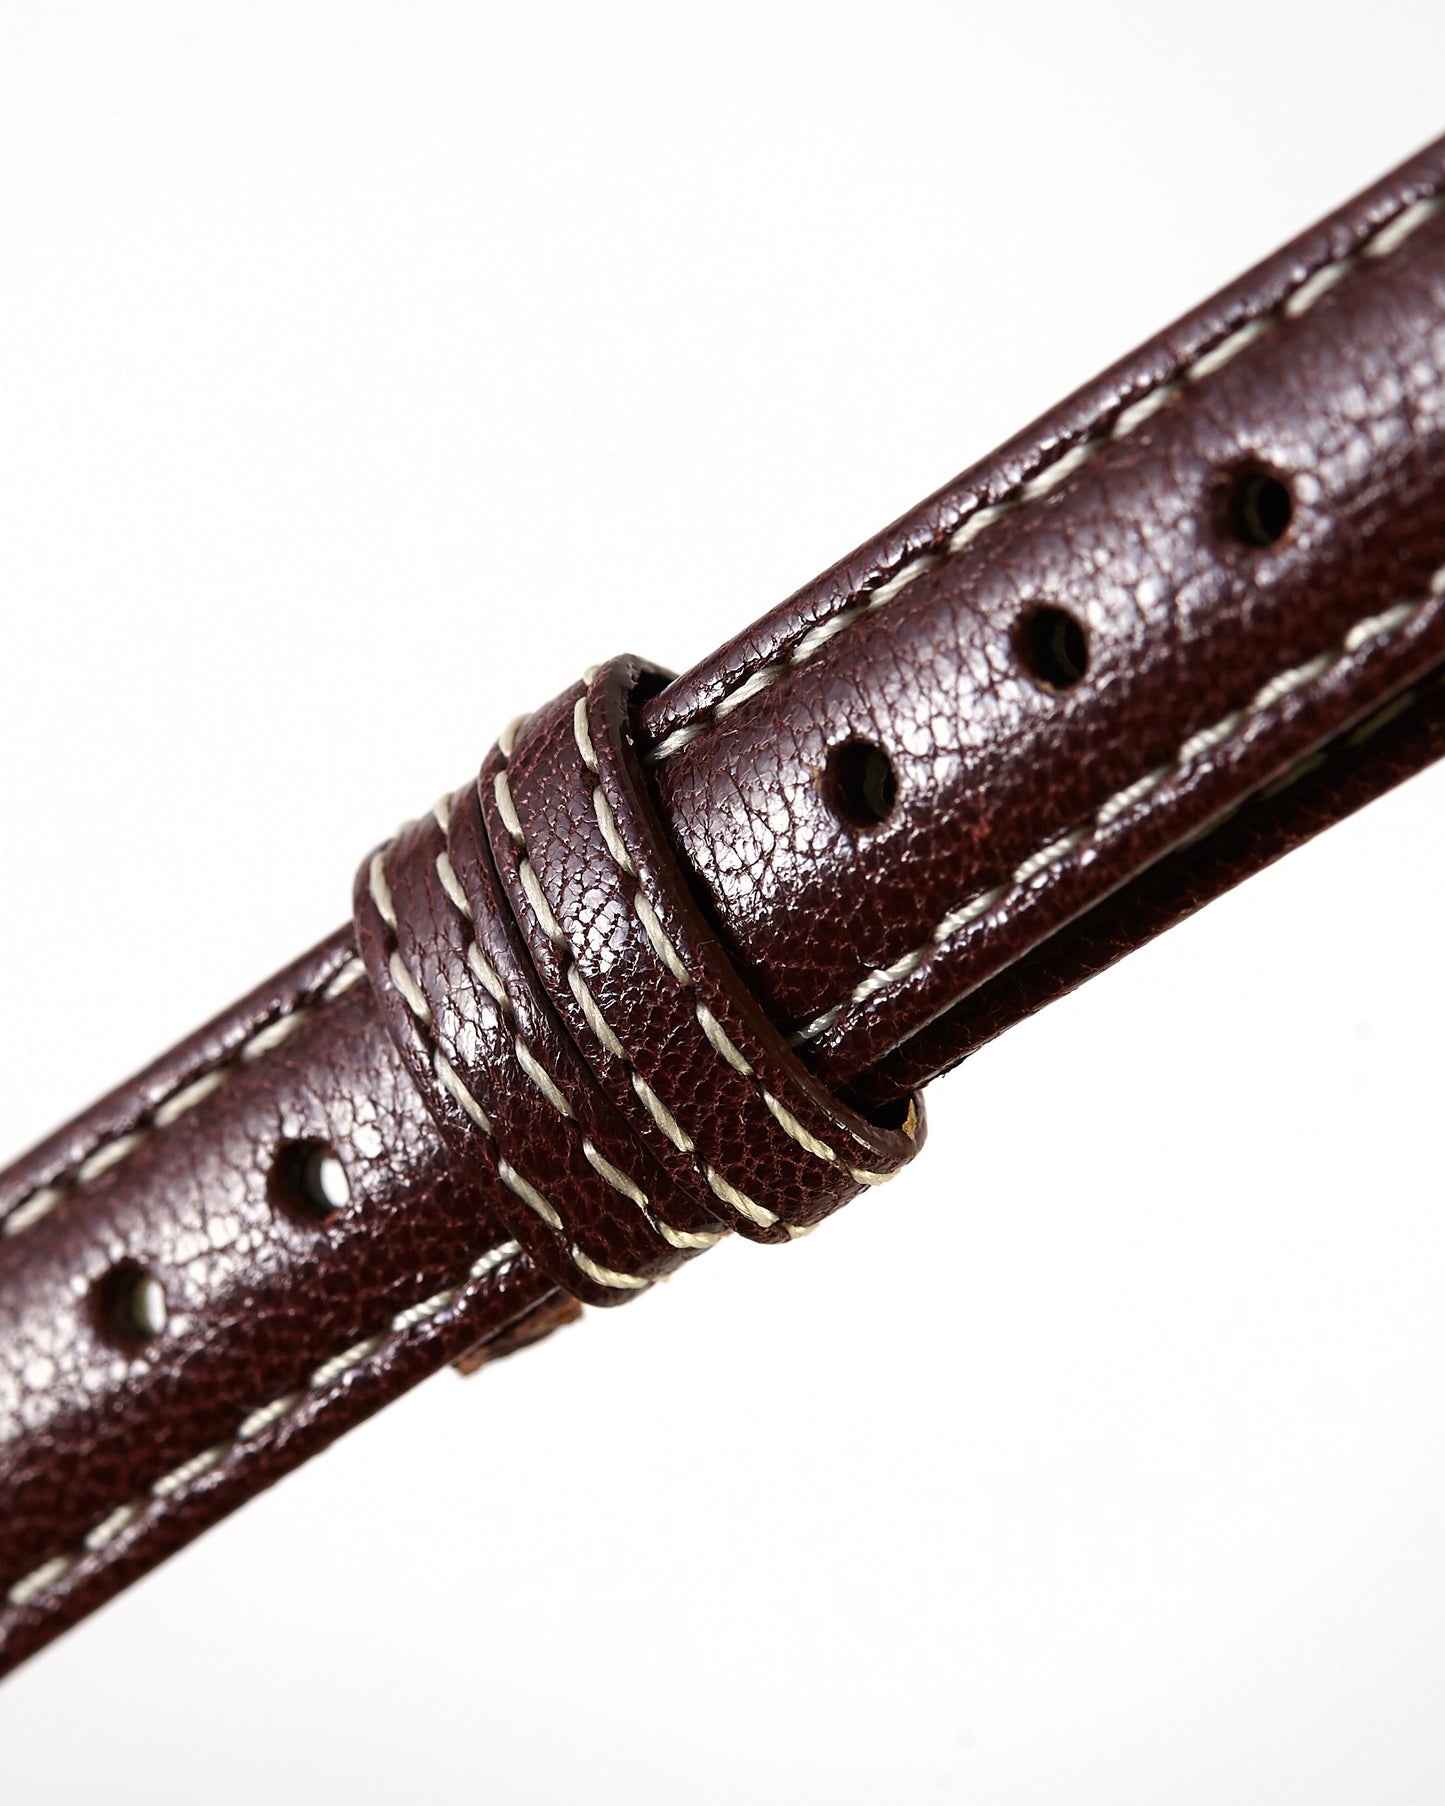 Ecclissi 14mm x 12mm Brown Leather Strap 23520